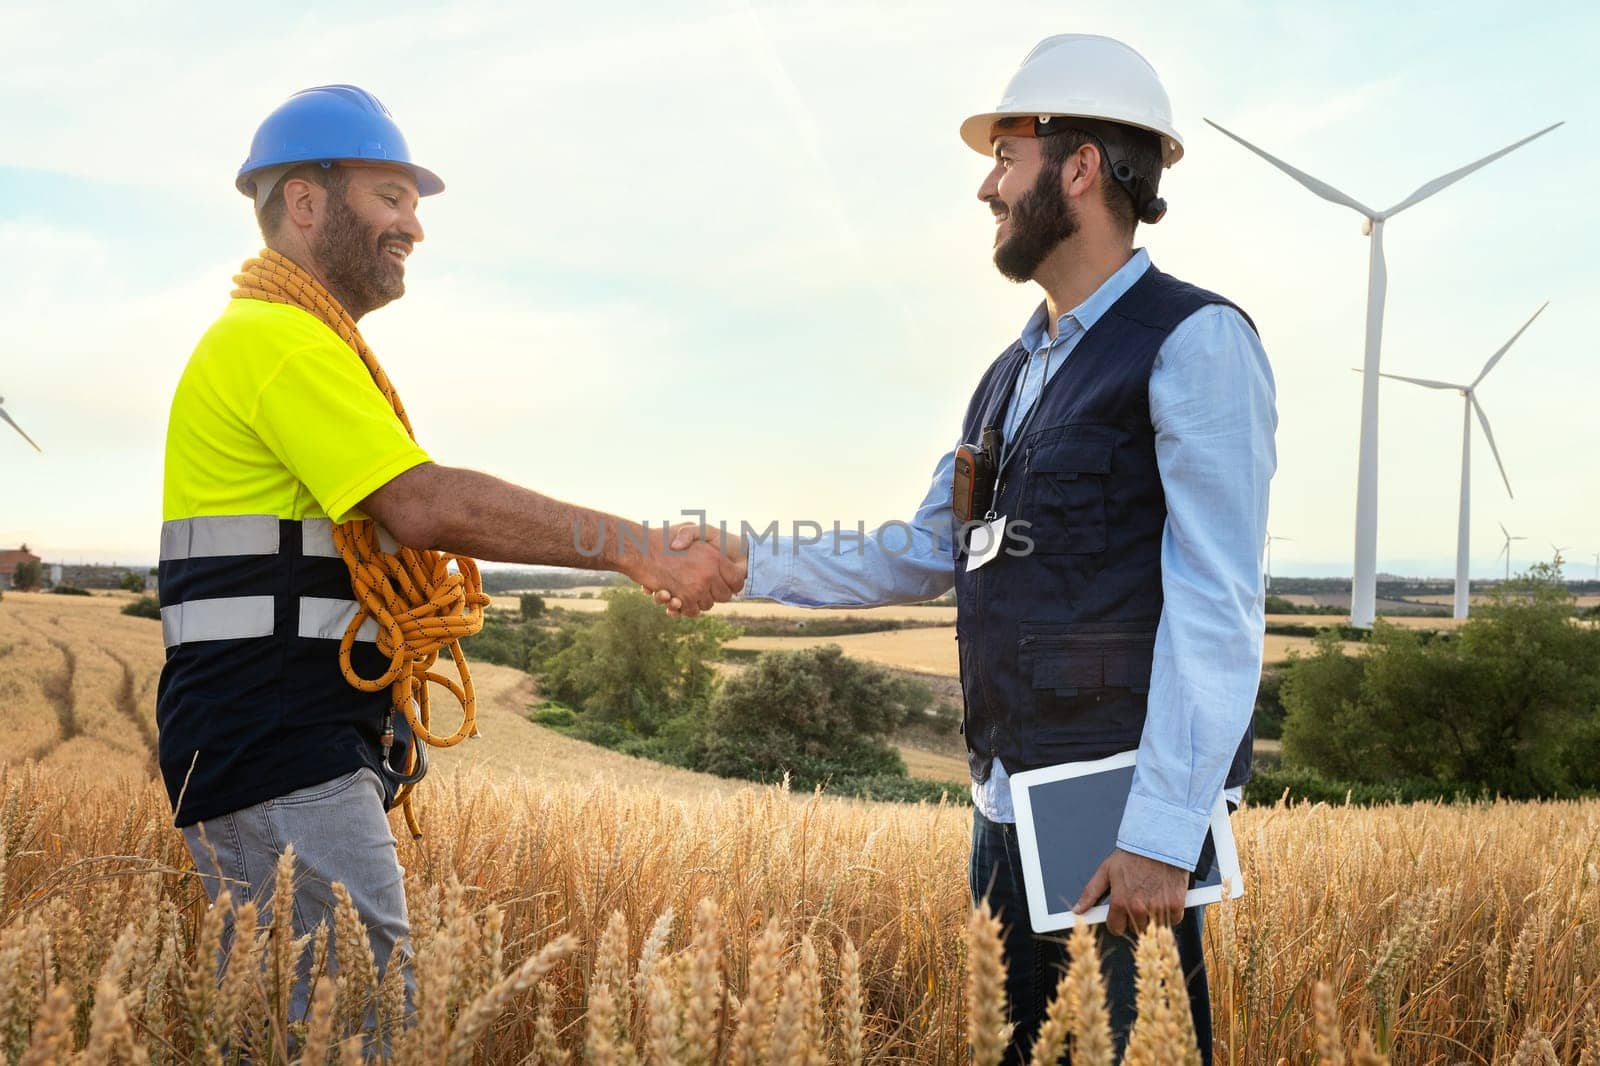 Happy Male electric engineer and smiling maintenance worker shaking hands in wind turbine farm. Renewable energy.